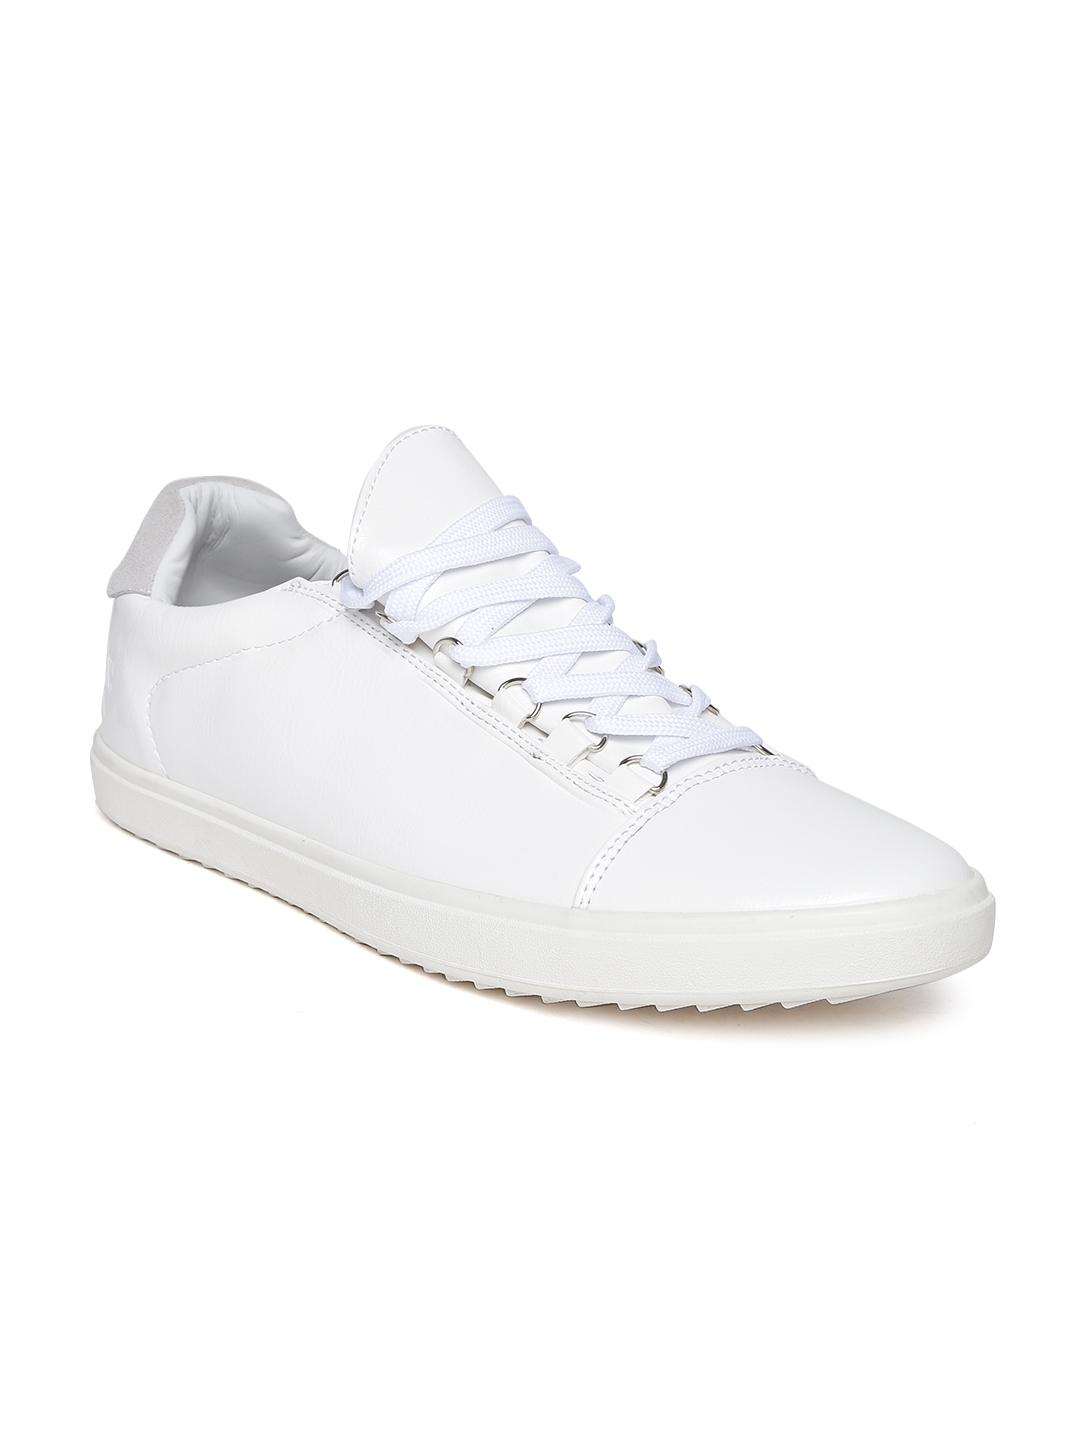 Buy Numero Uno Men White Solid Sneakers - Casual Shoes for Men 1543035 ...